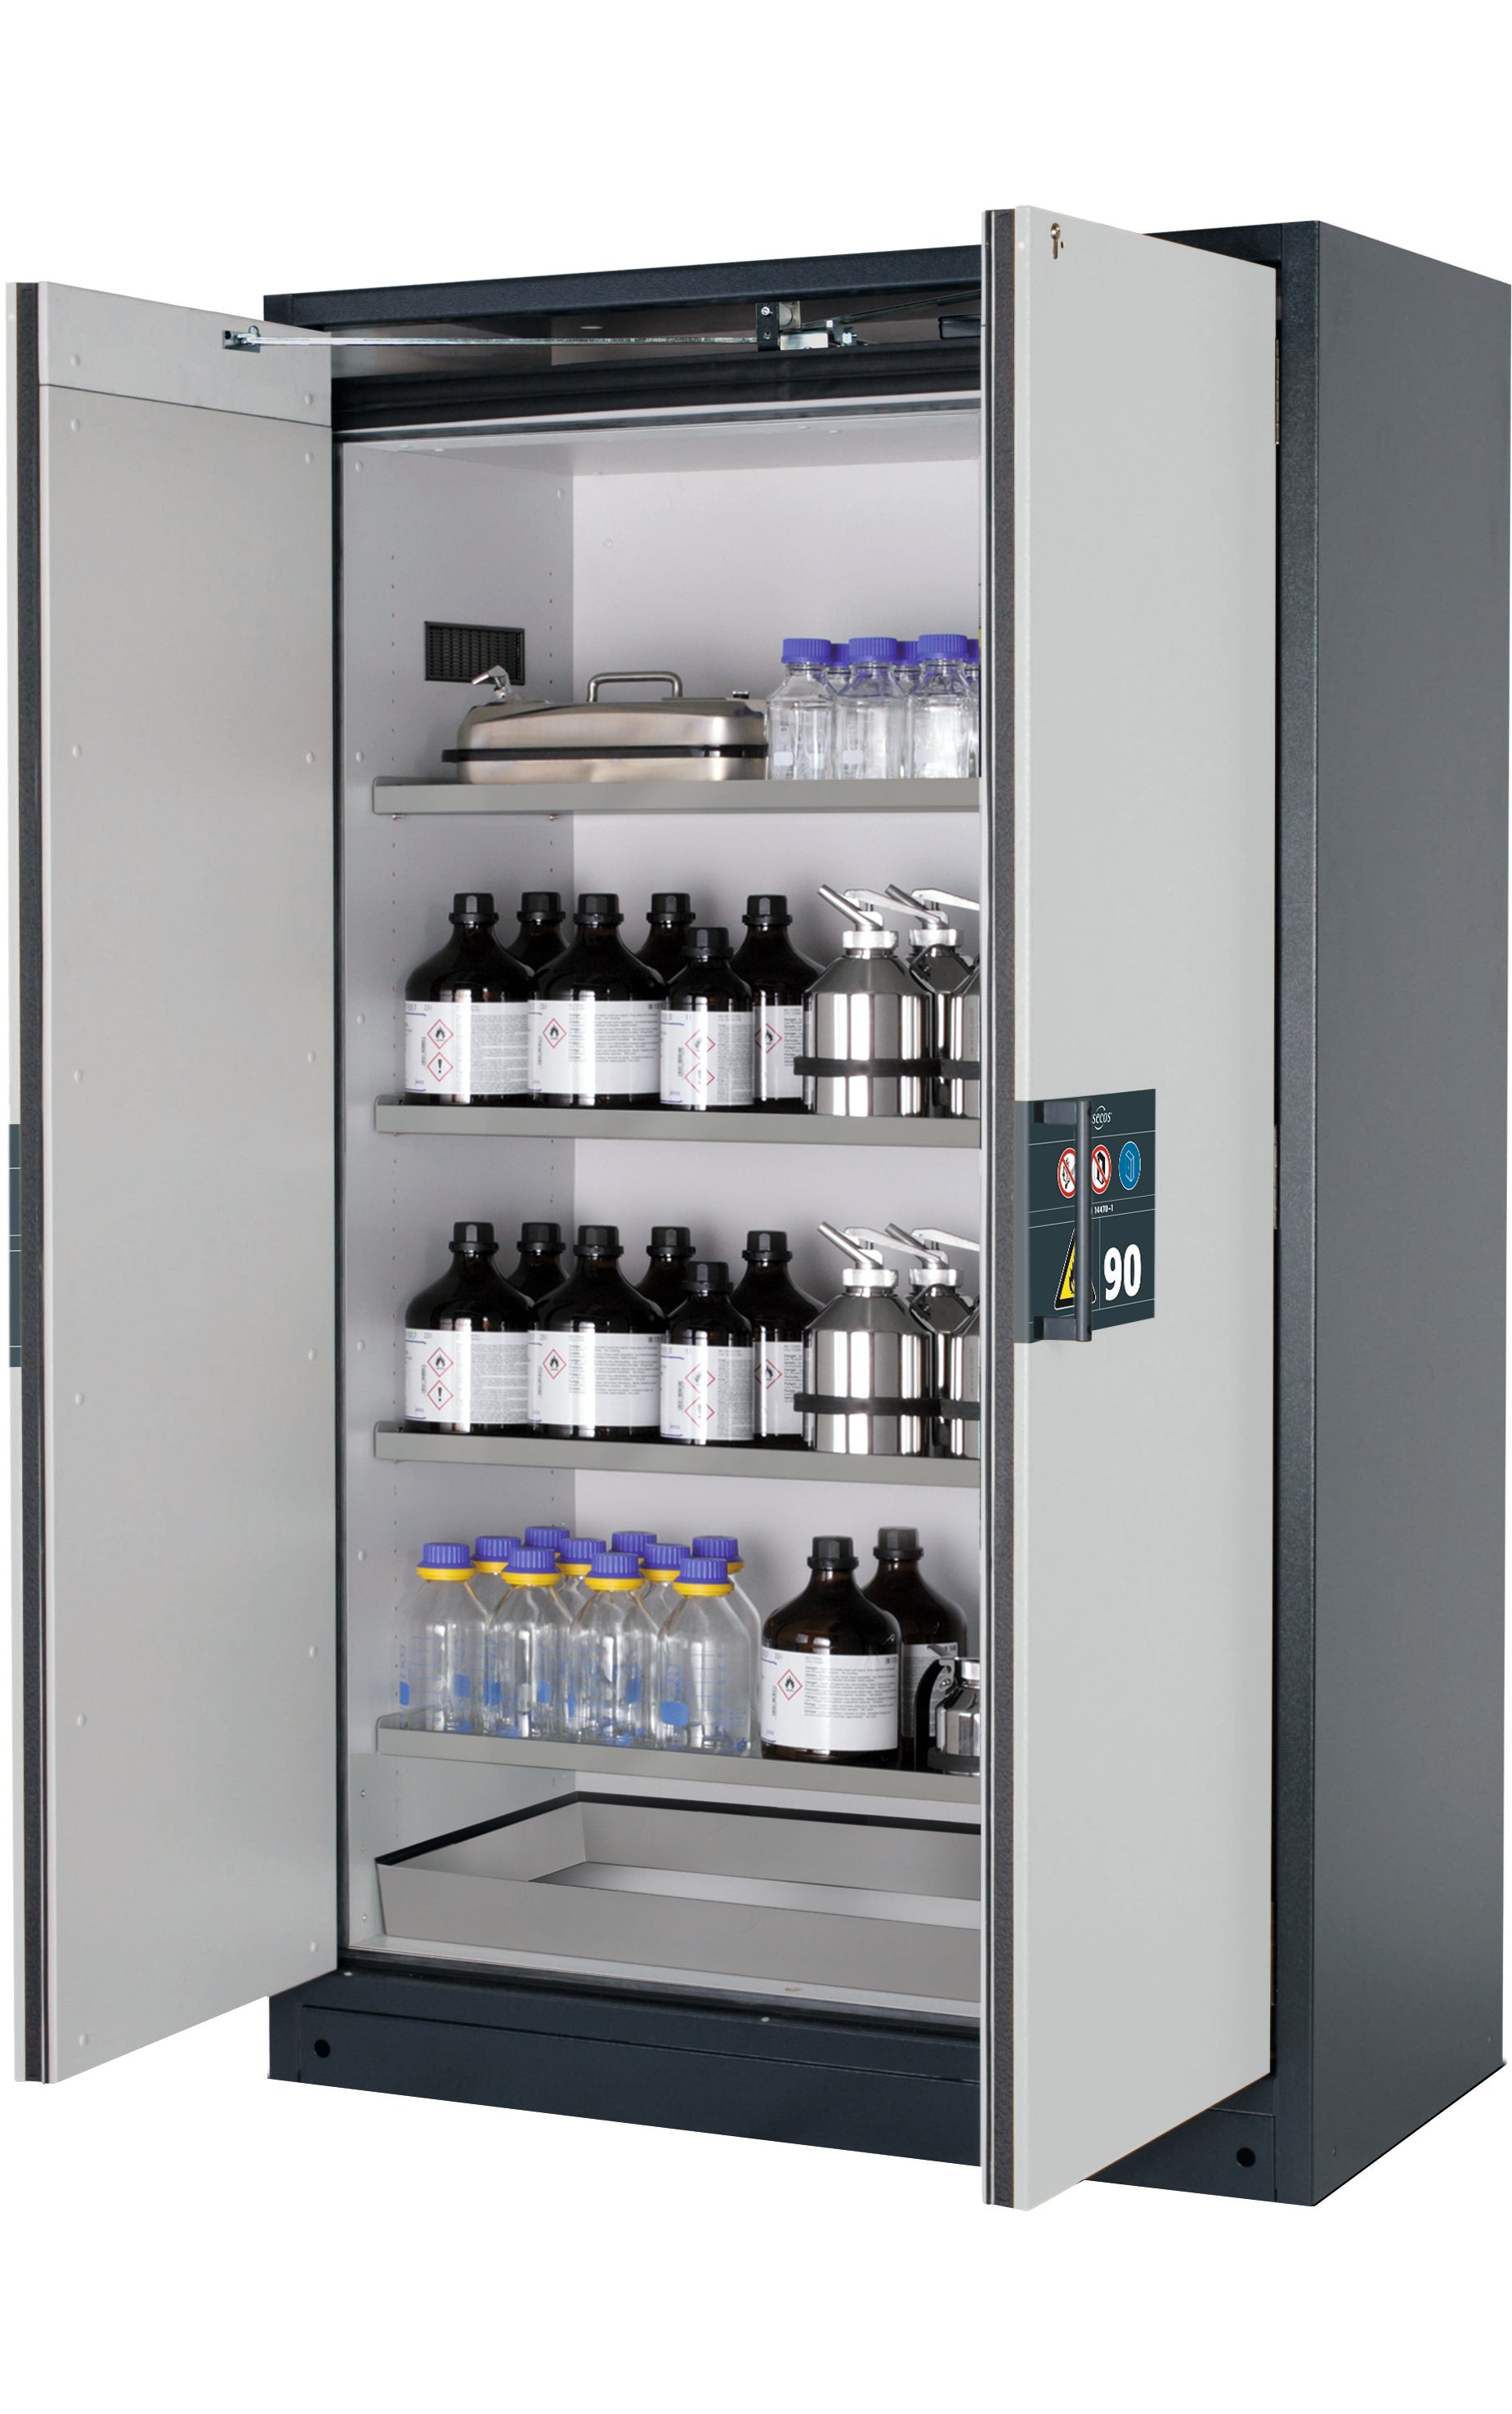 Type 90 safety storage cabinet Q-PEGASUS-90 model Q90.195.120.WDAC in light grey RAL 7035 with 4x shelf standard (stainless steel 1.4301),